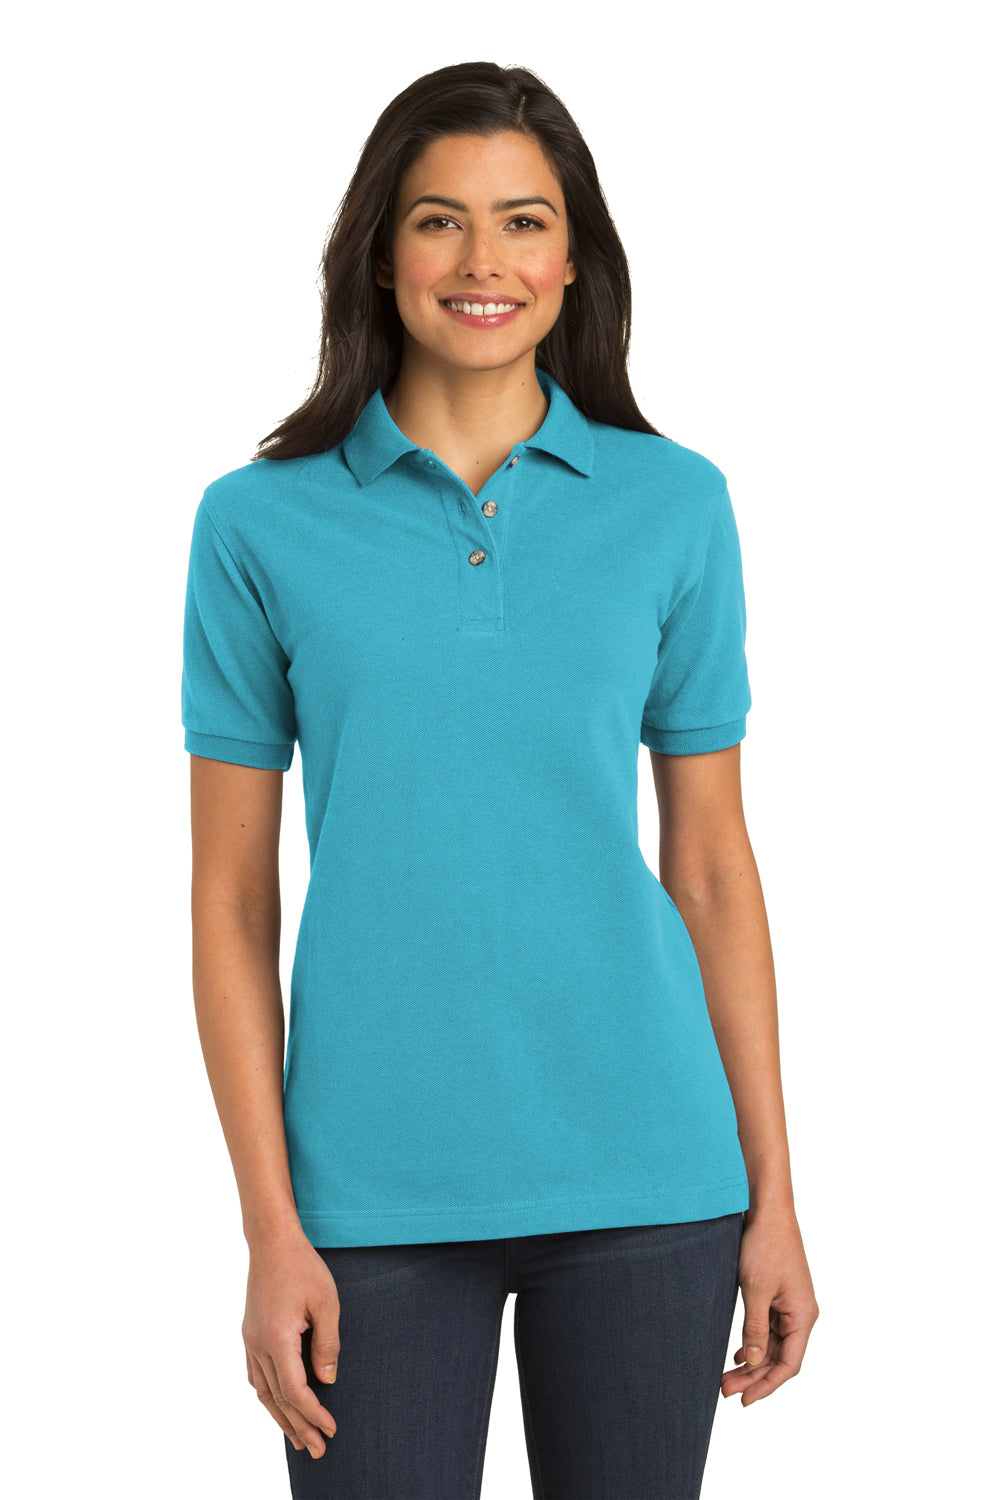 Port Authority L420 Womens Short Sleeve Polo Shirt Turquoise Blue Front